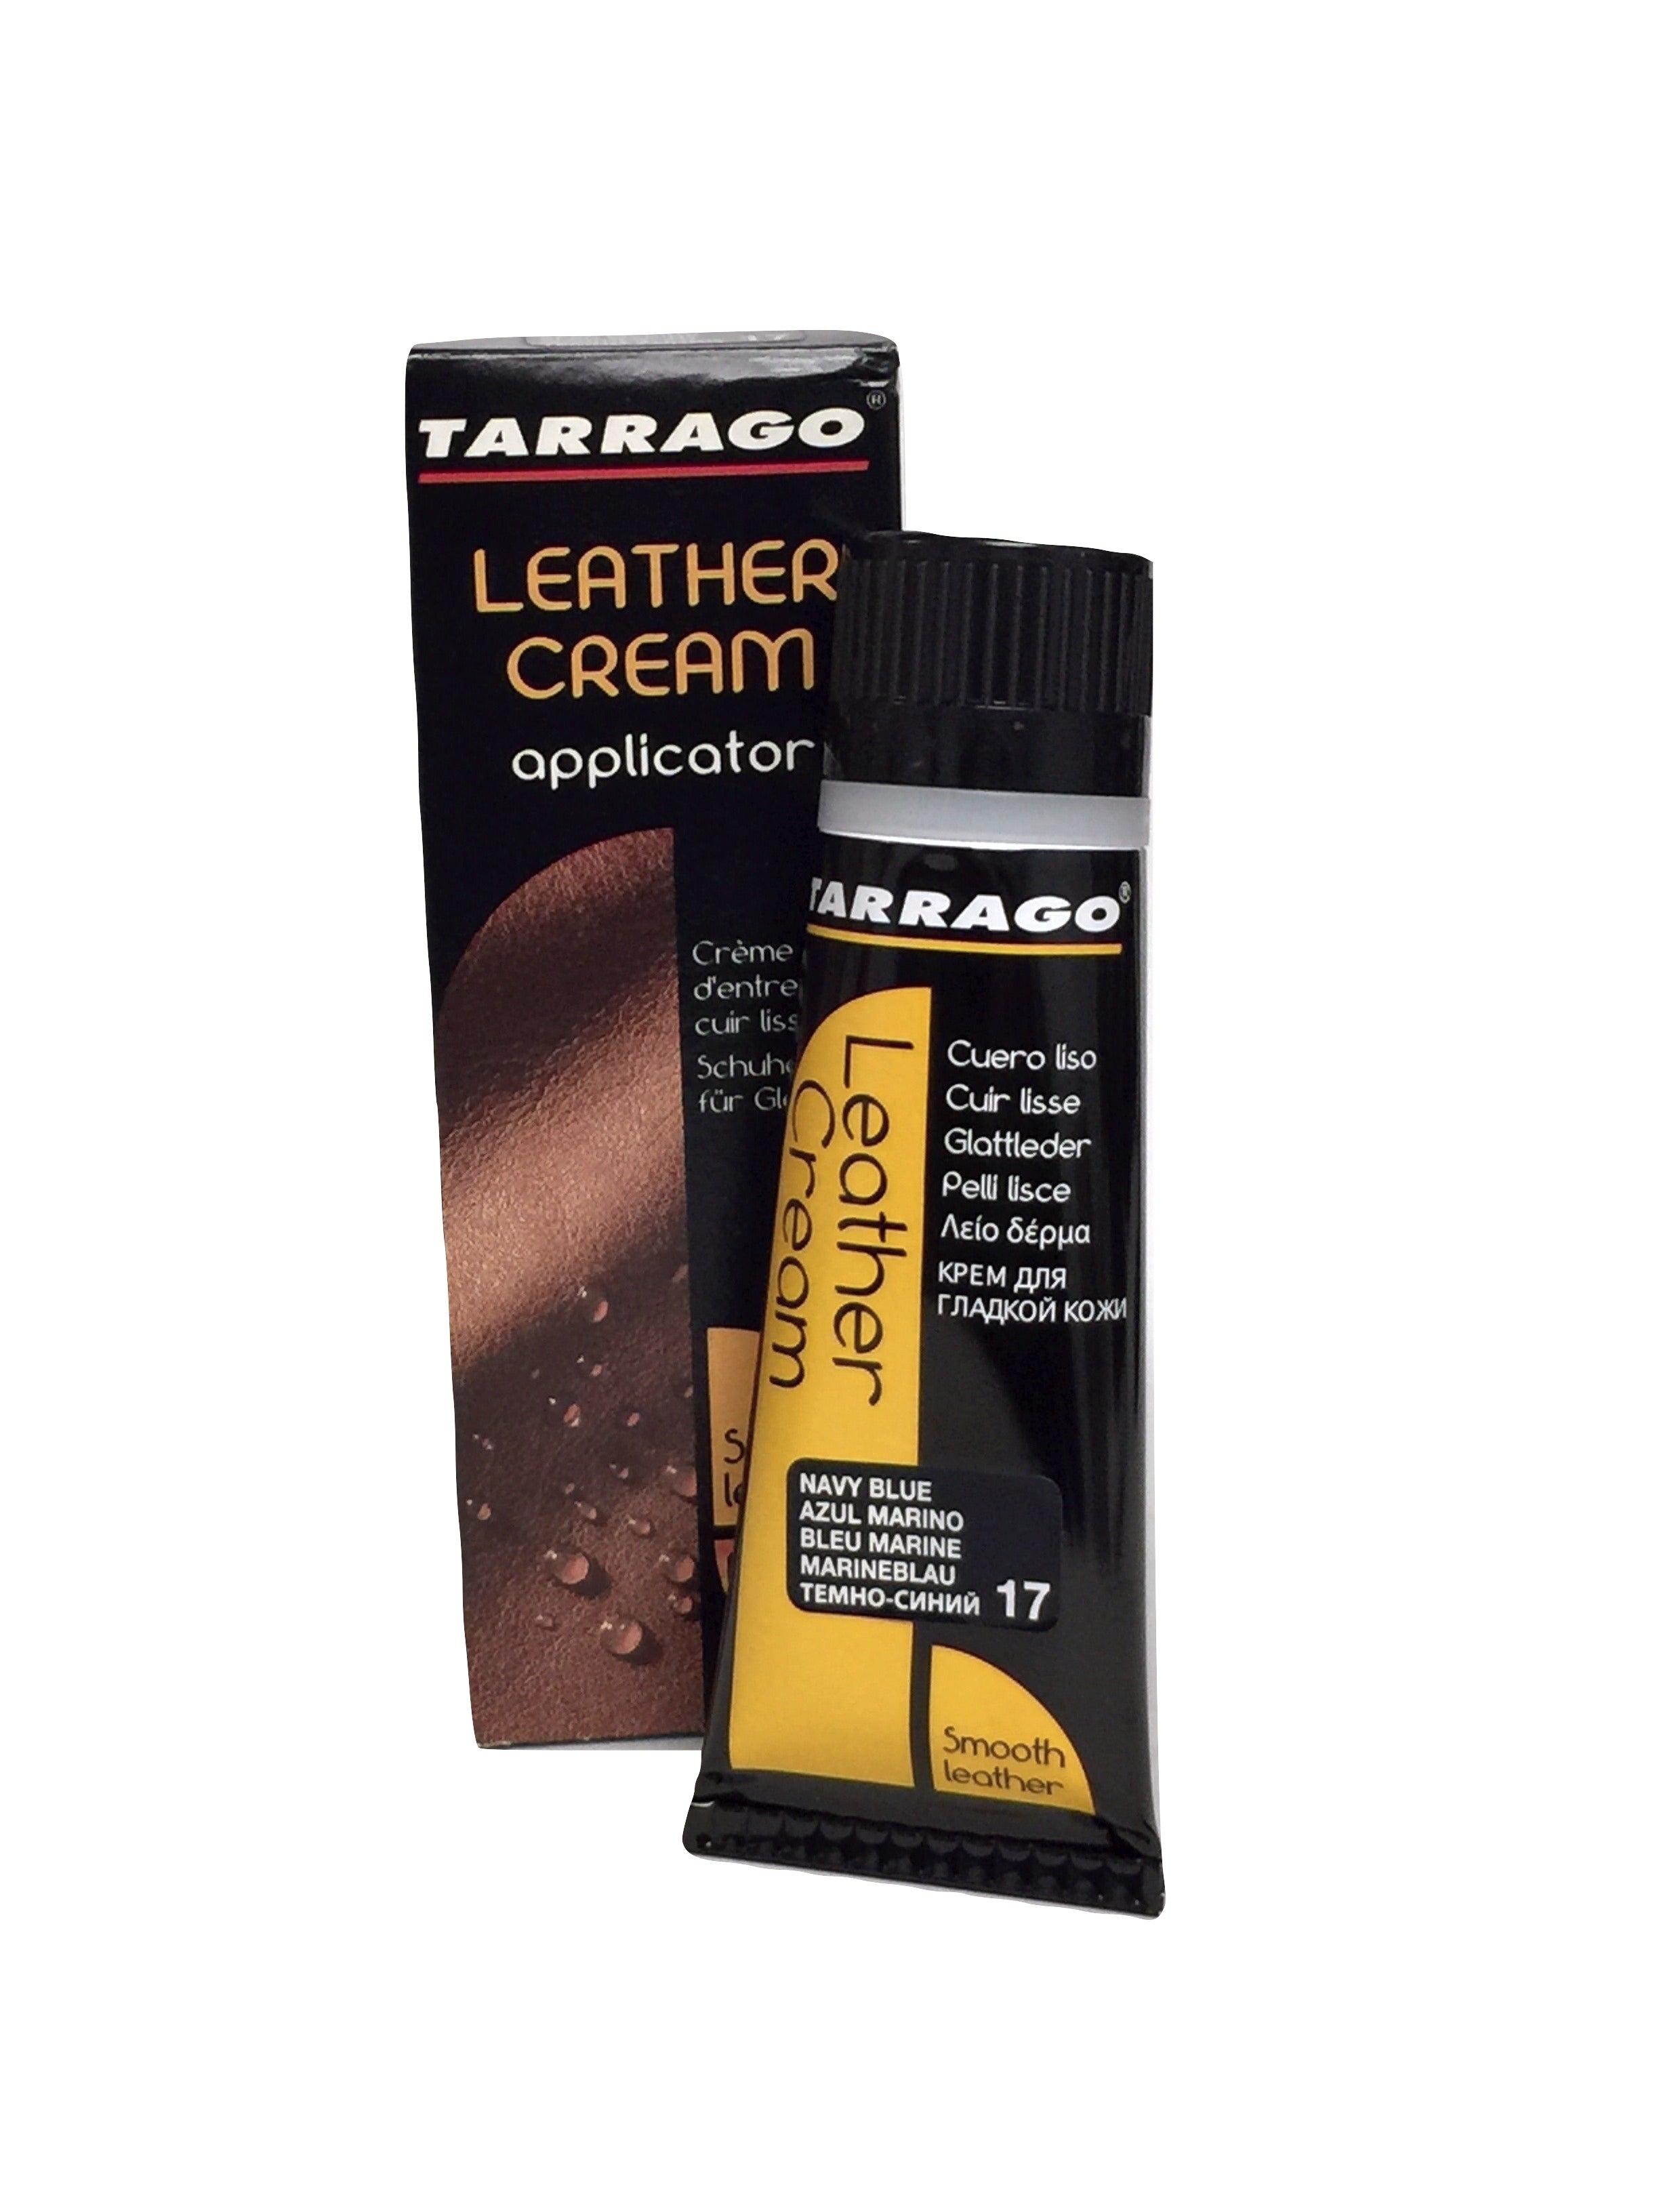 Leather Cream Tube with Applicator